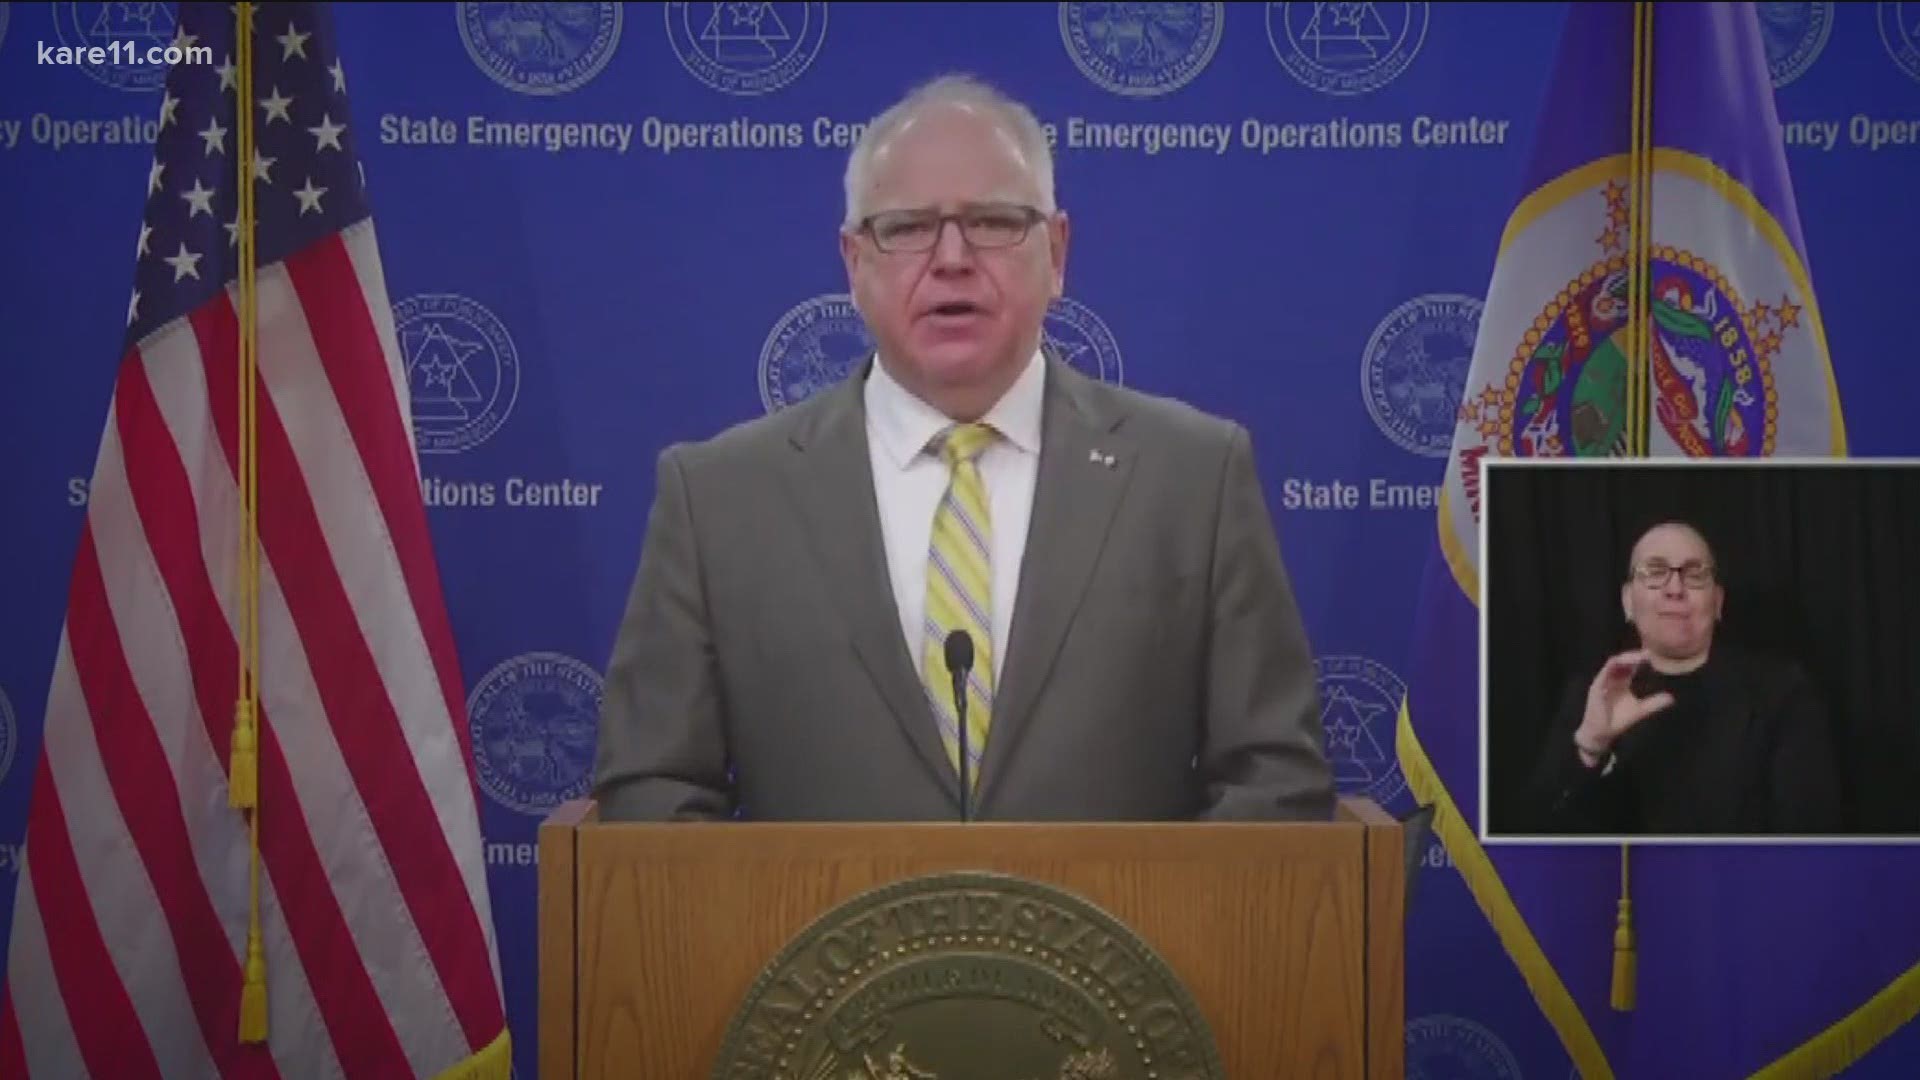 Walz said he expects all schools to offer some form of in-person learning by March 8.